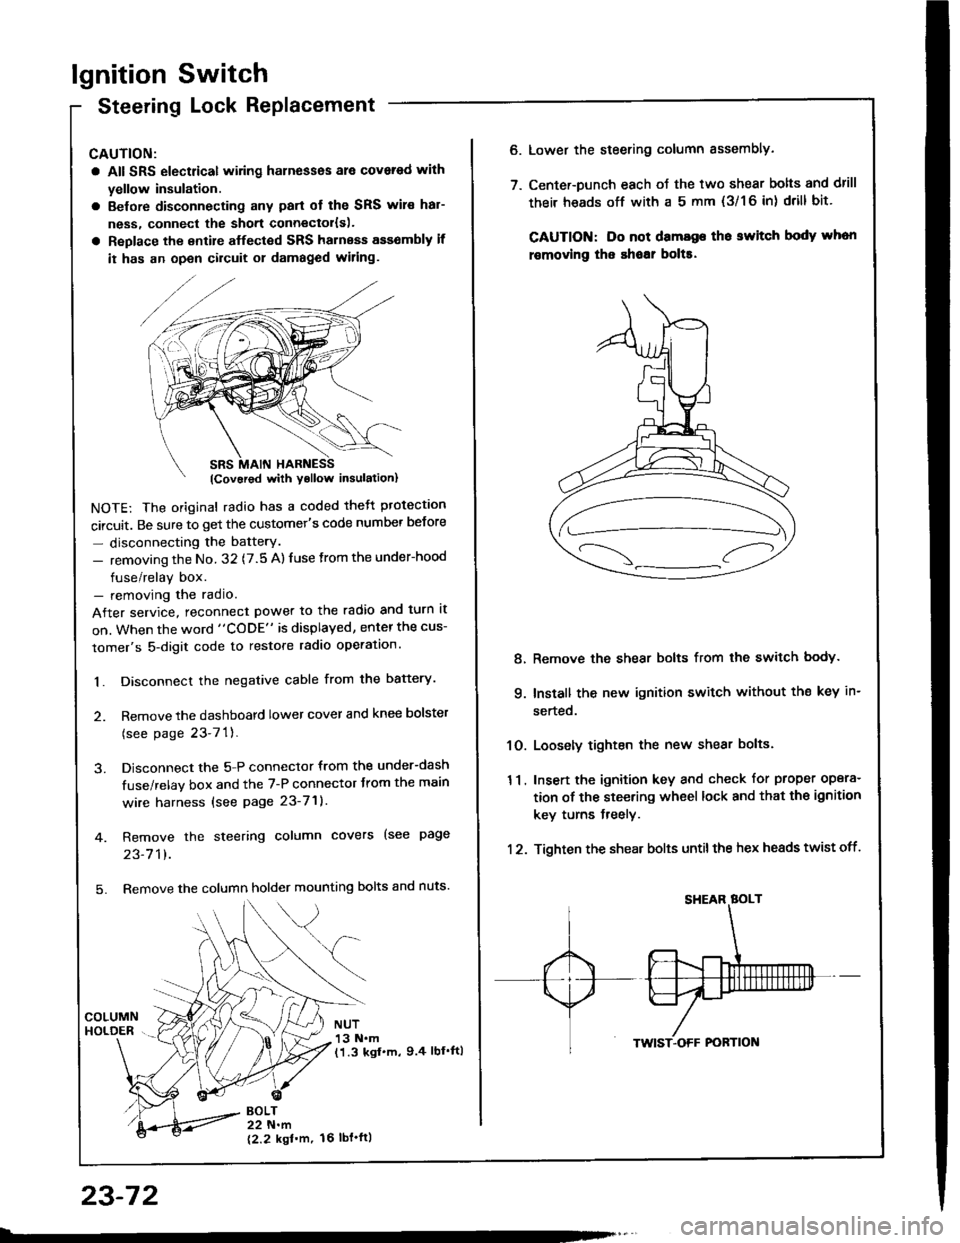 HONDA INTEGRA 1994 4.G User Guide lgnition Switch
Steering Lock Replacement
CAUTION:
a All SRS electrical wiring harnesses ale covsred with
yellow insulation.
a Belore disconnecting any parl ot the SRS wir€ hal-
ness, connecl the sh